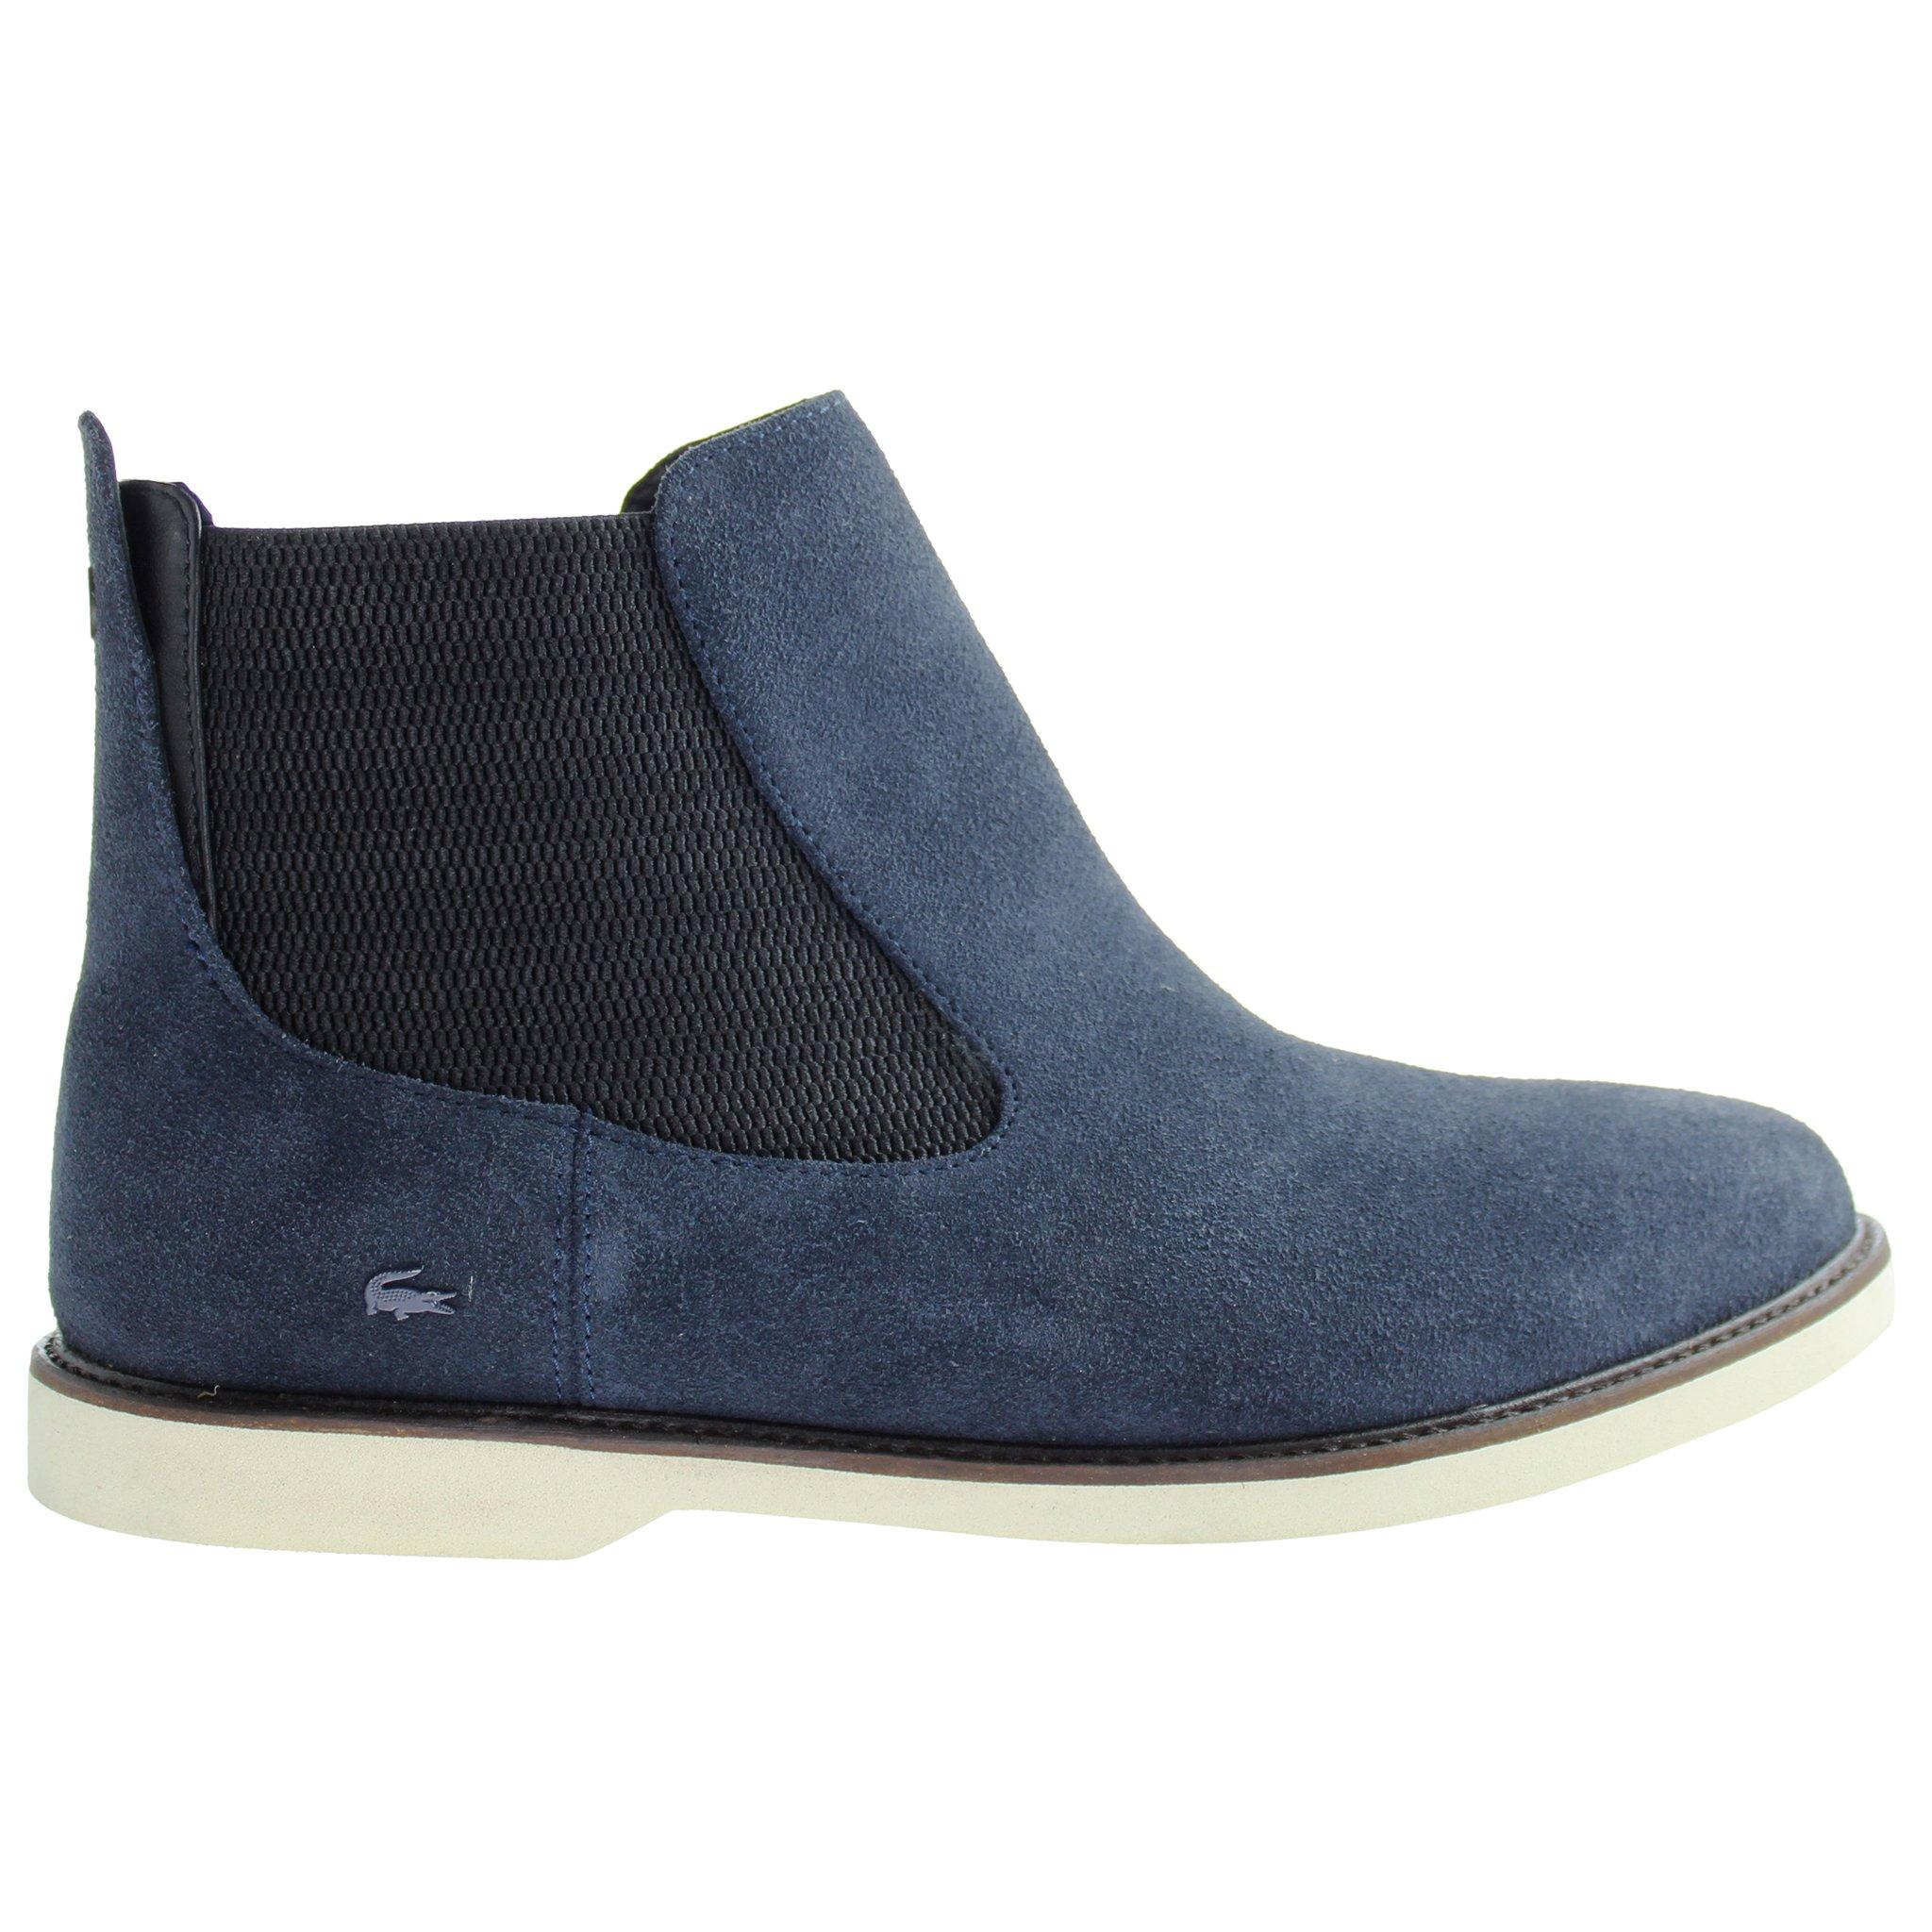 slip-on suede leather boots